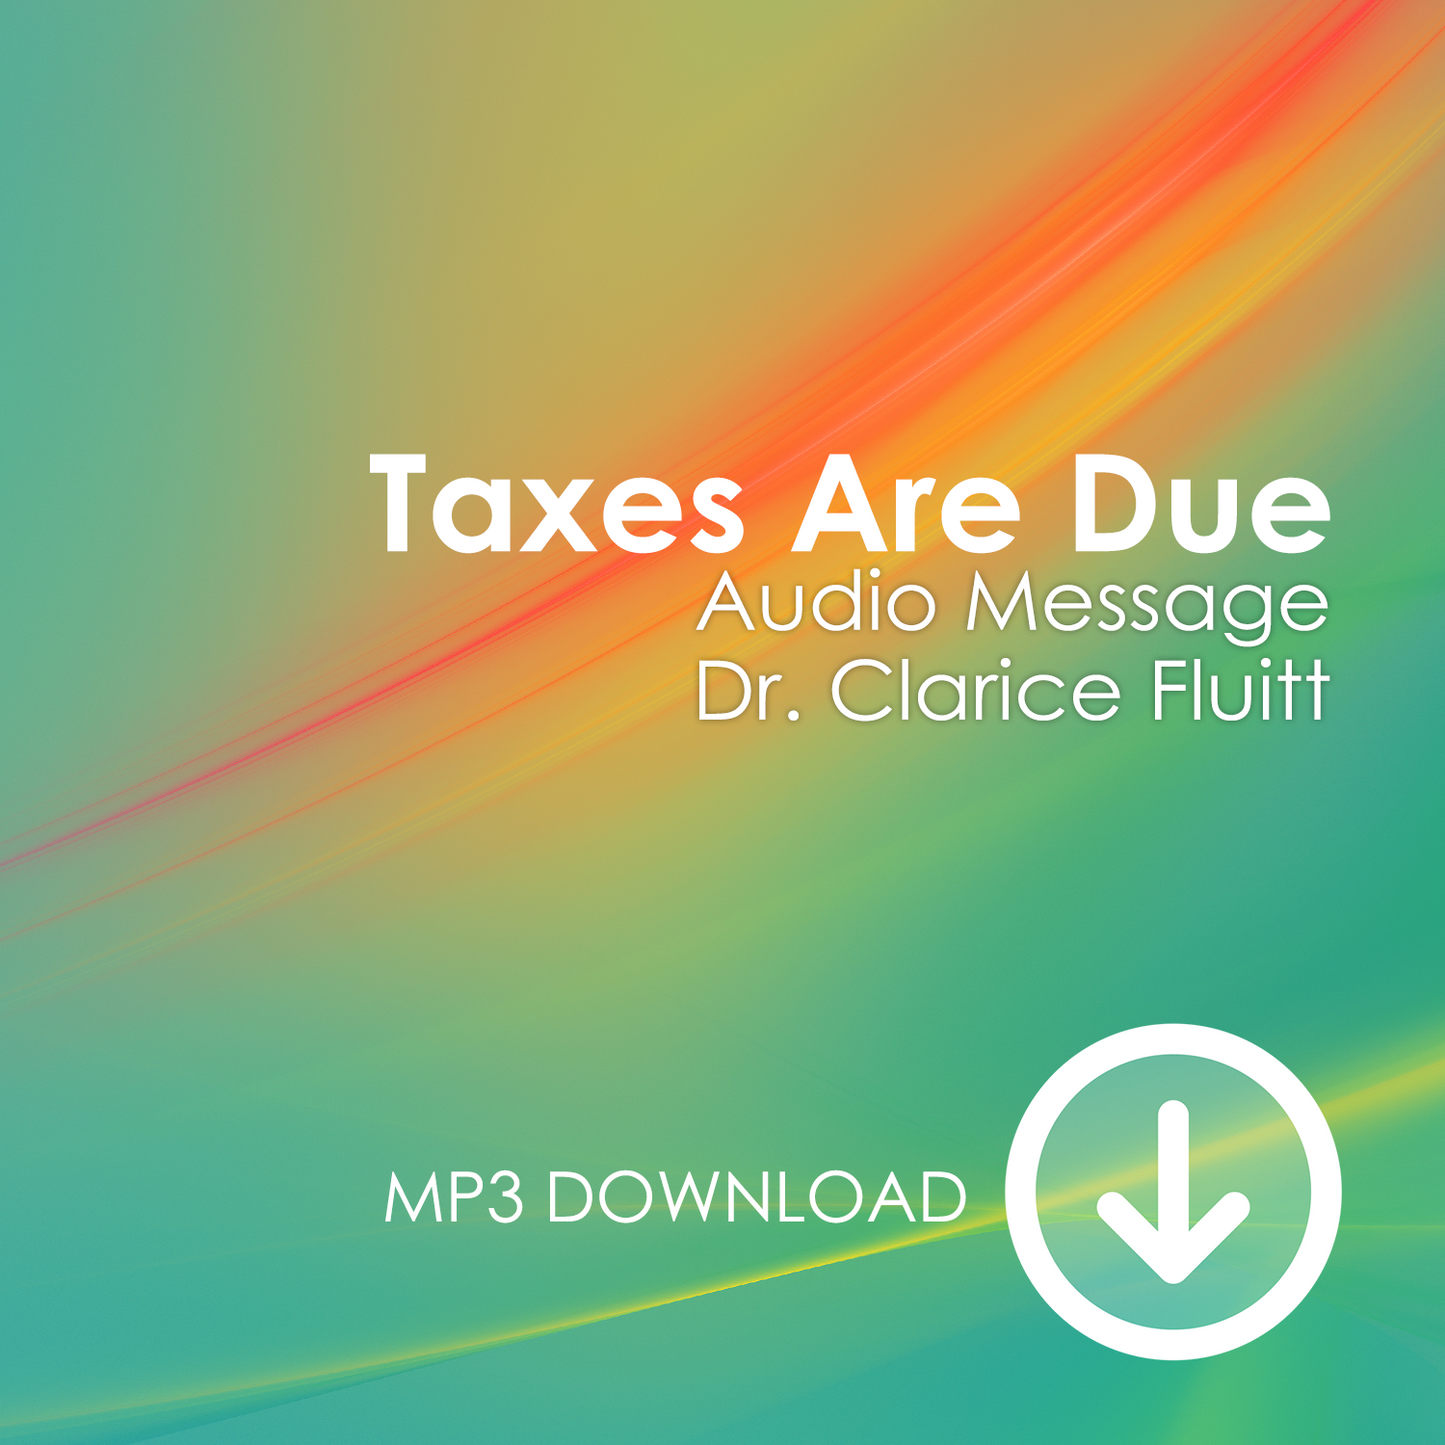 Taxes are Due MP3